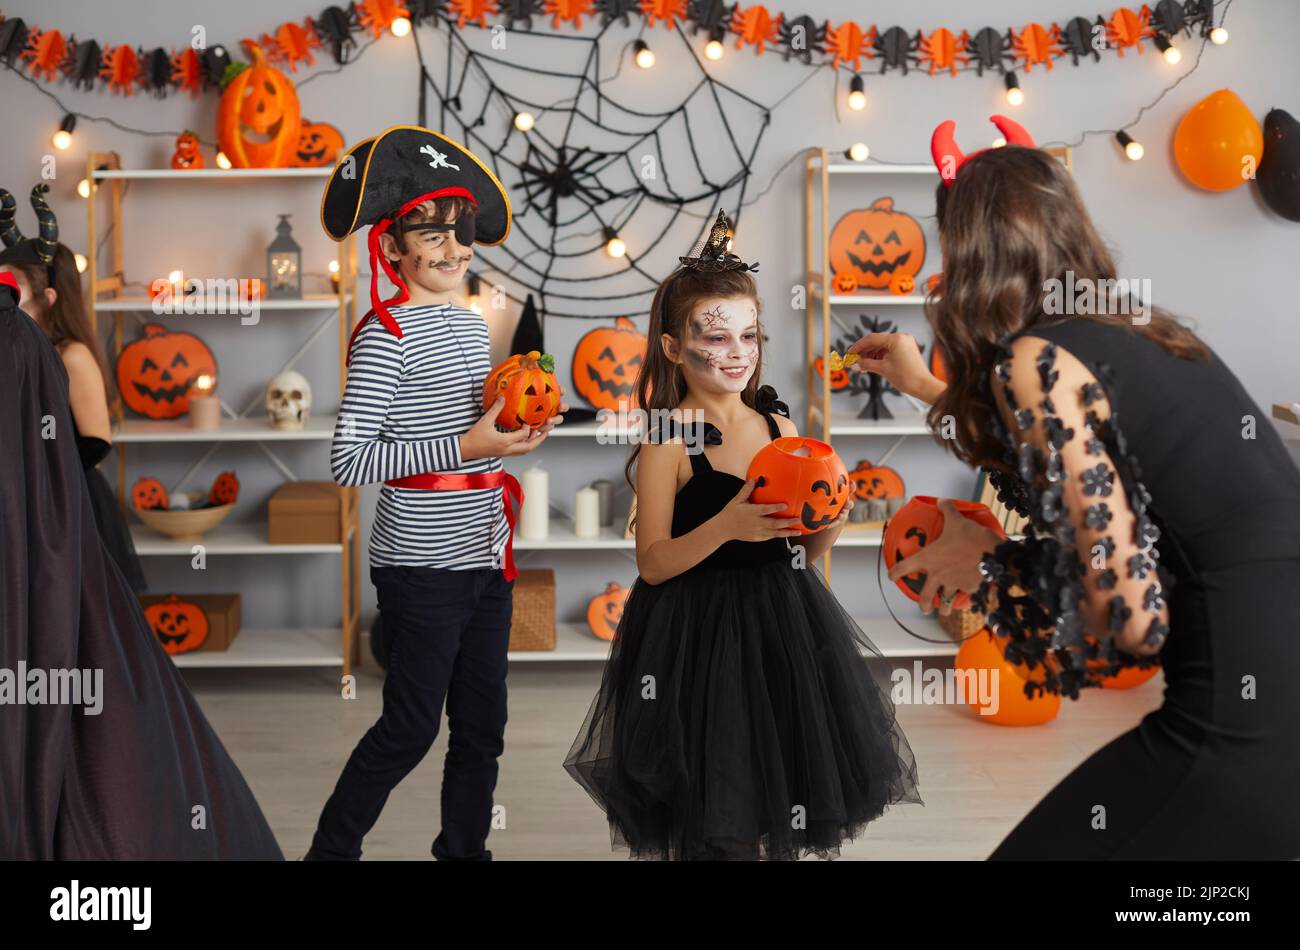 Woman at Halloween party hands out candy to children who are dressed in spooky masquerade costumes. Stock Photo